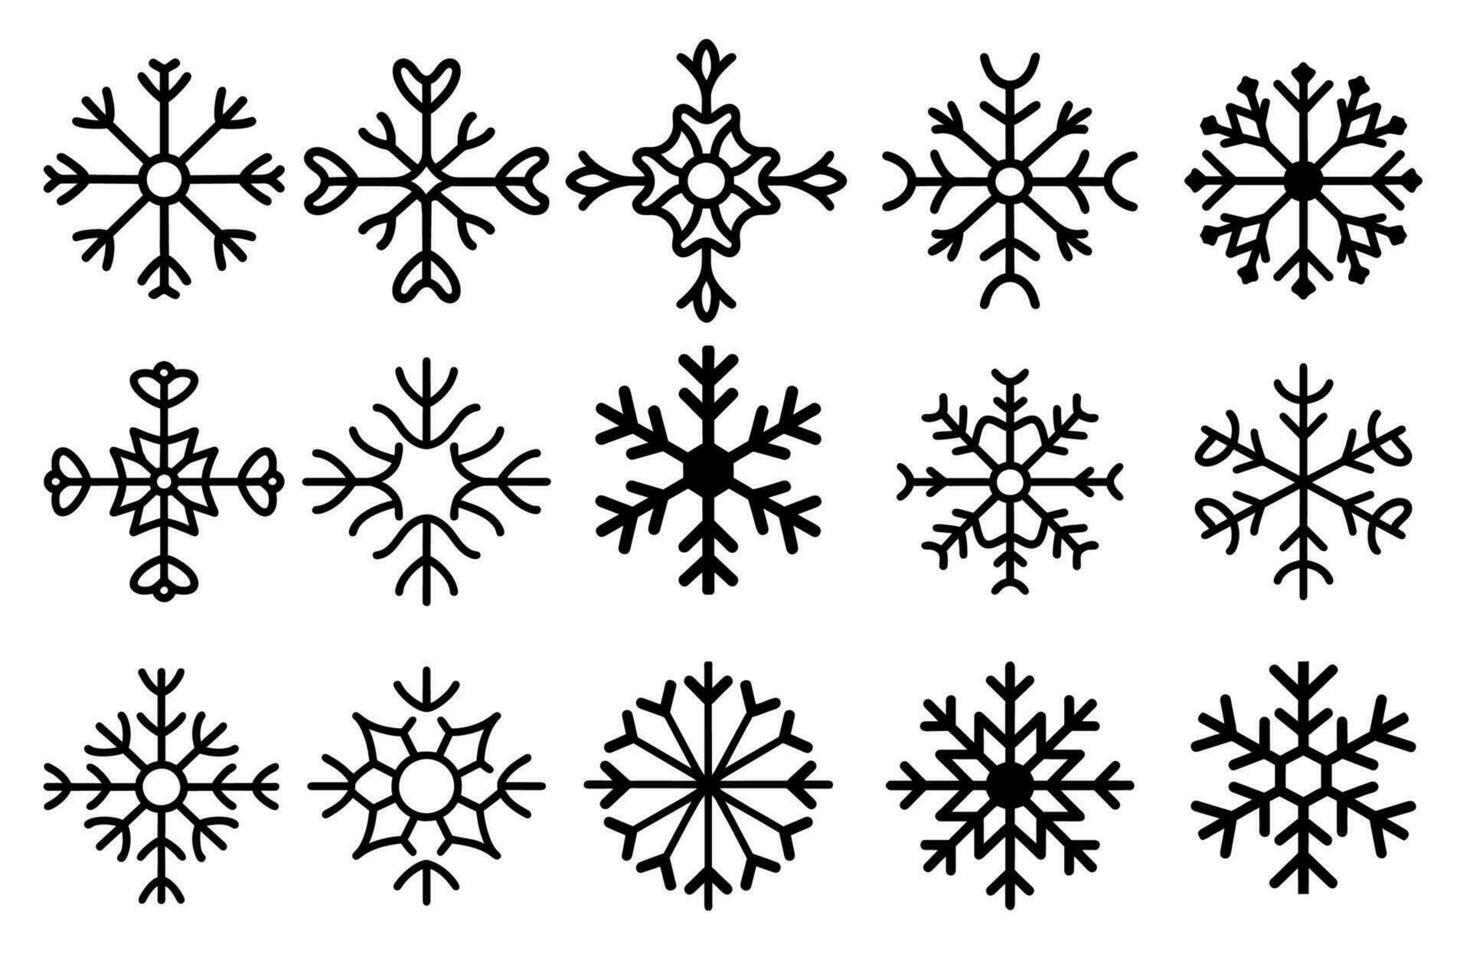 Snowflakes set. Vector illustration isolated on white background.